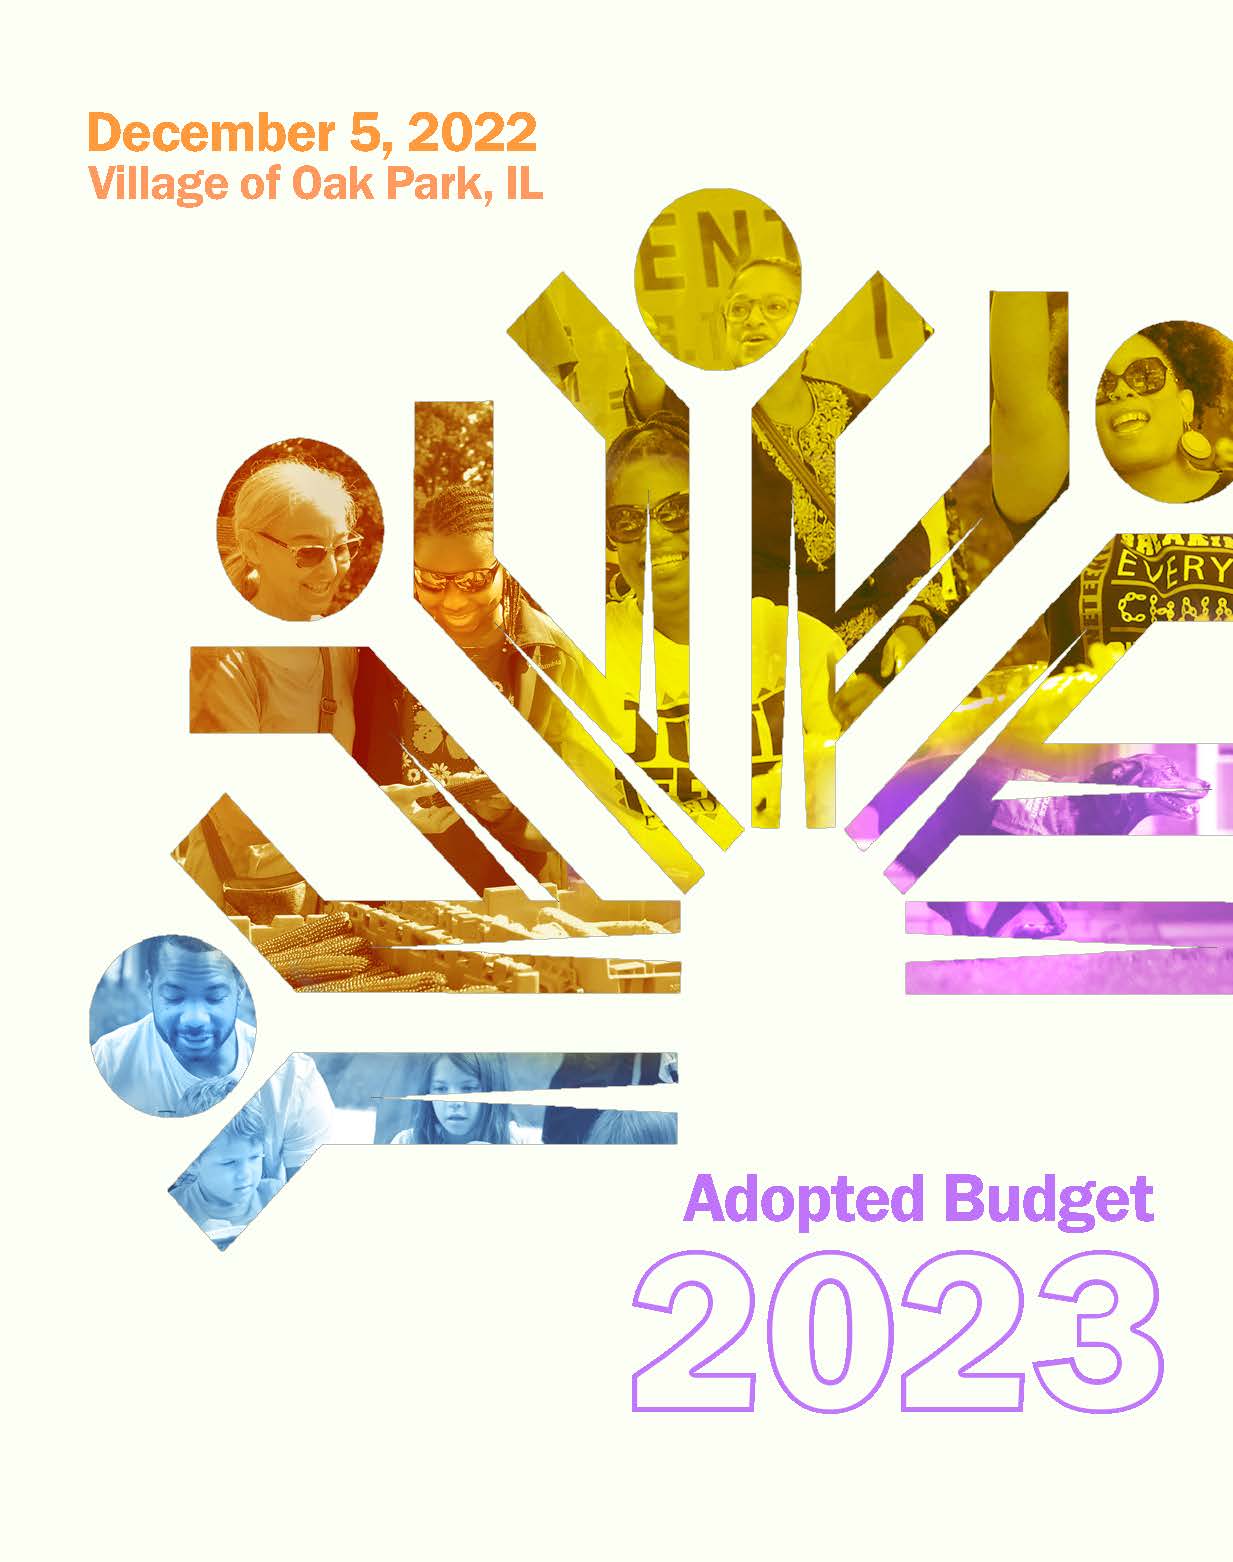 2023 adopted budget